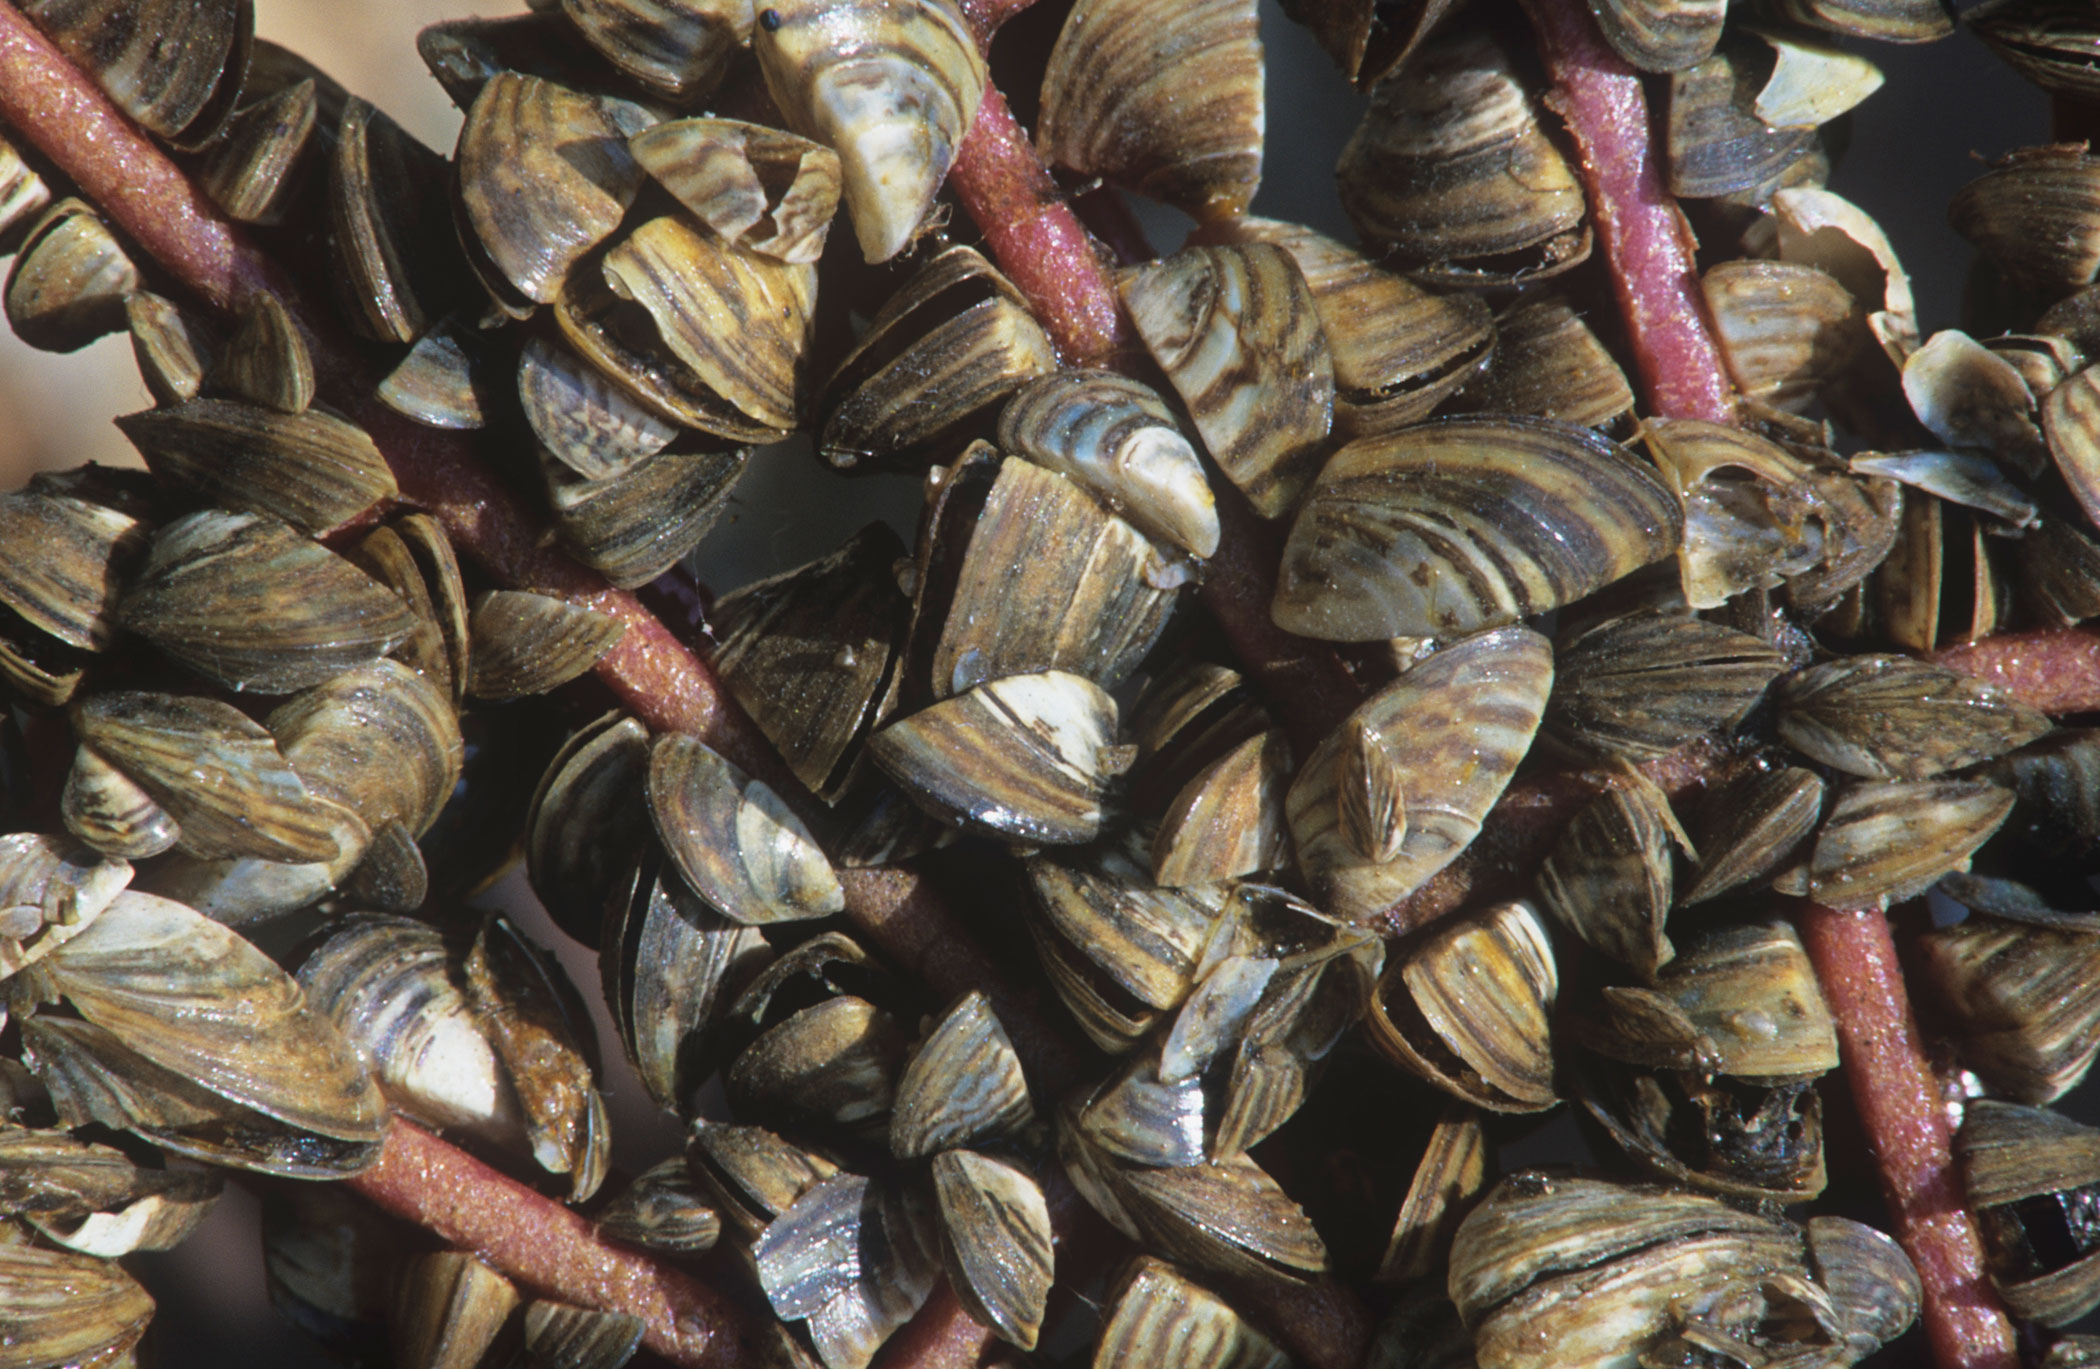 Though mussels are considered one of the great delicacies of the seafood world, a particular variety of the crustacean has left a bitter ecological aftertaste. Zebra mussels, an invasive species native to the Caspian Sea are thought to have hitched a ride to the midwestern Great Lakes in the late 1980s by clinging to the hulls of U.S.–bound European vessels. The unwelcome visitors, that have since spread east to New England, are known to feed on the phytoplankton that nourishes the filter feeders which support the diets of larger fish— effectively starving other species unfortunate enough to live alongside them.